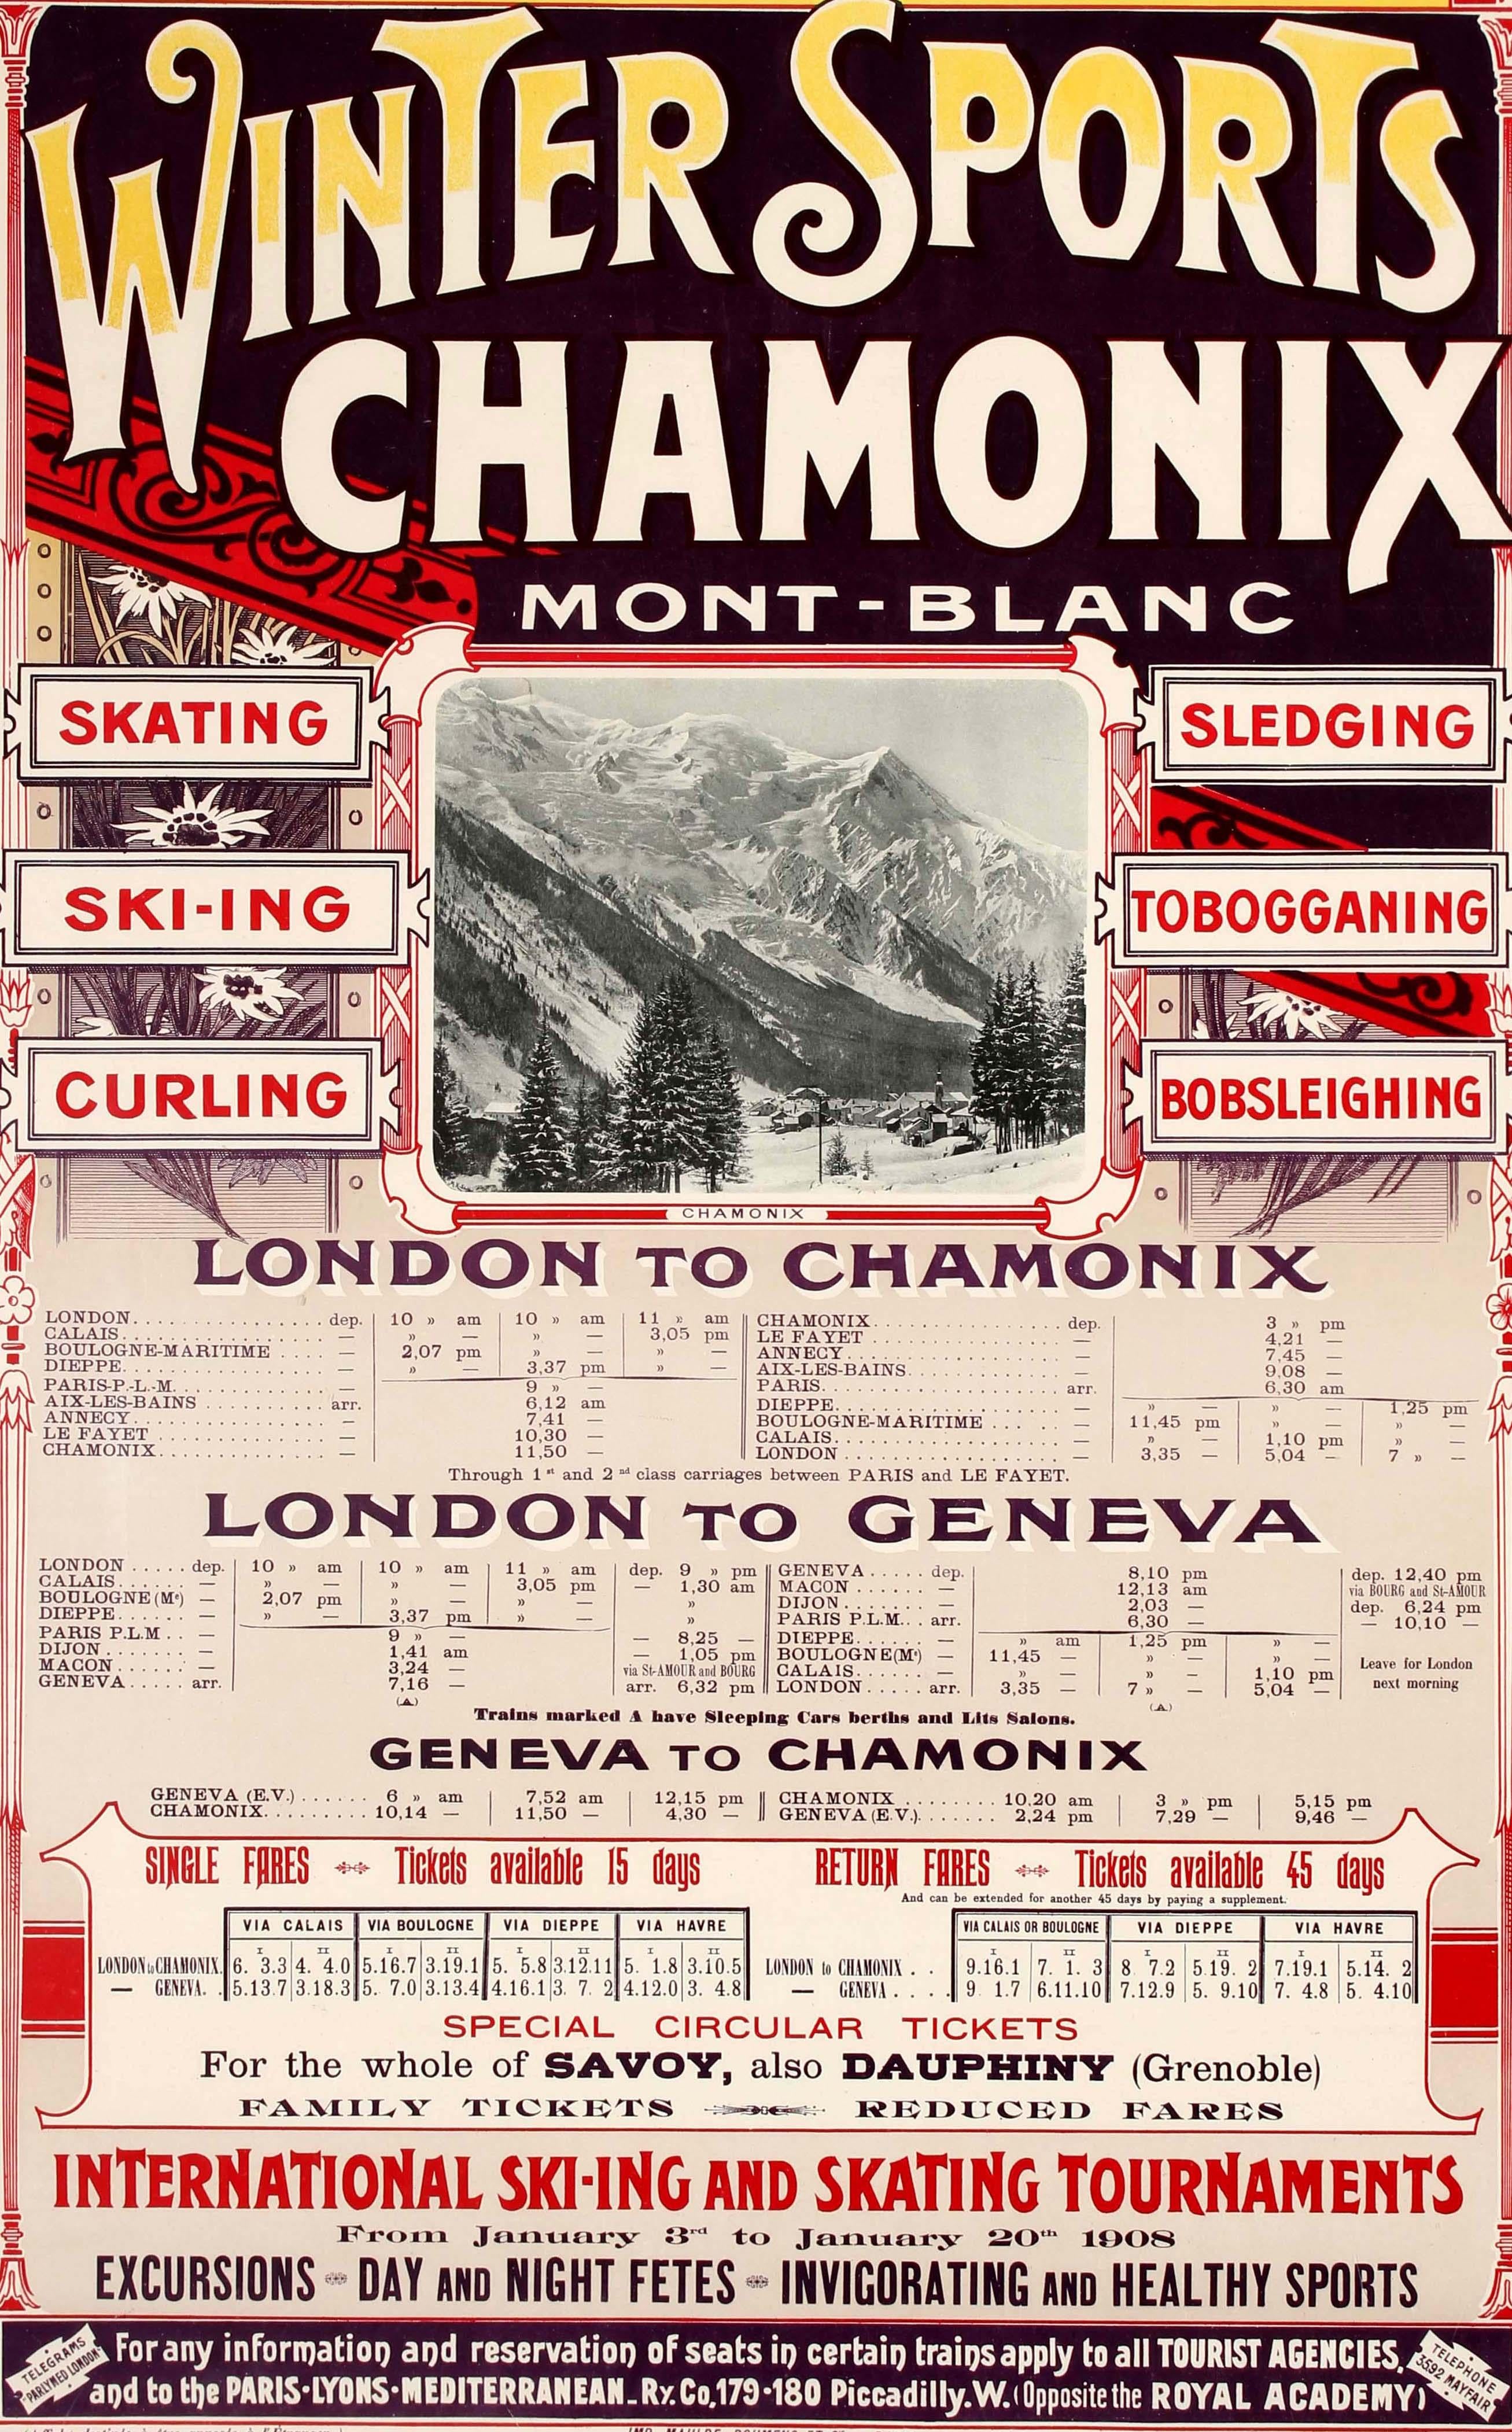 Original antique travel advertising poster published by the PLM Paris Lyons and Mediterranean Railway and issued abroad to promote its train services to the alpine resorts of Chamonix in the Mont Blanc region from London and Geneva with a list the